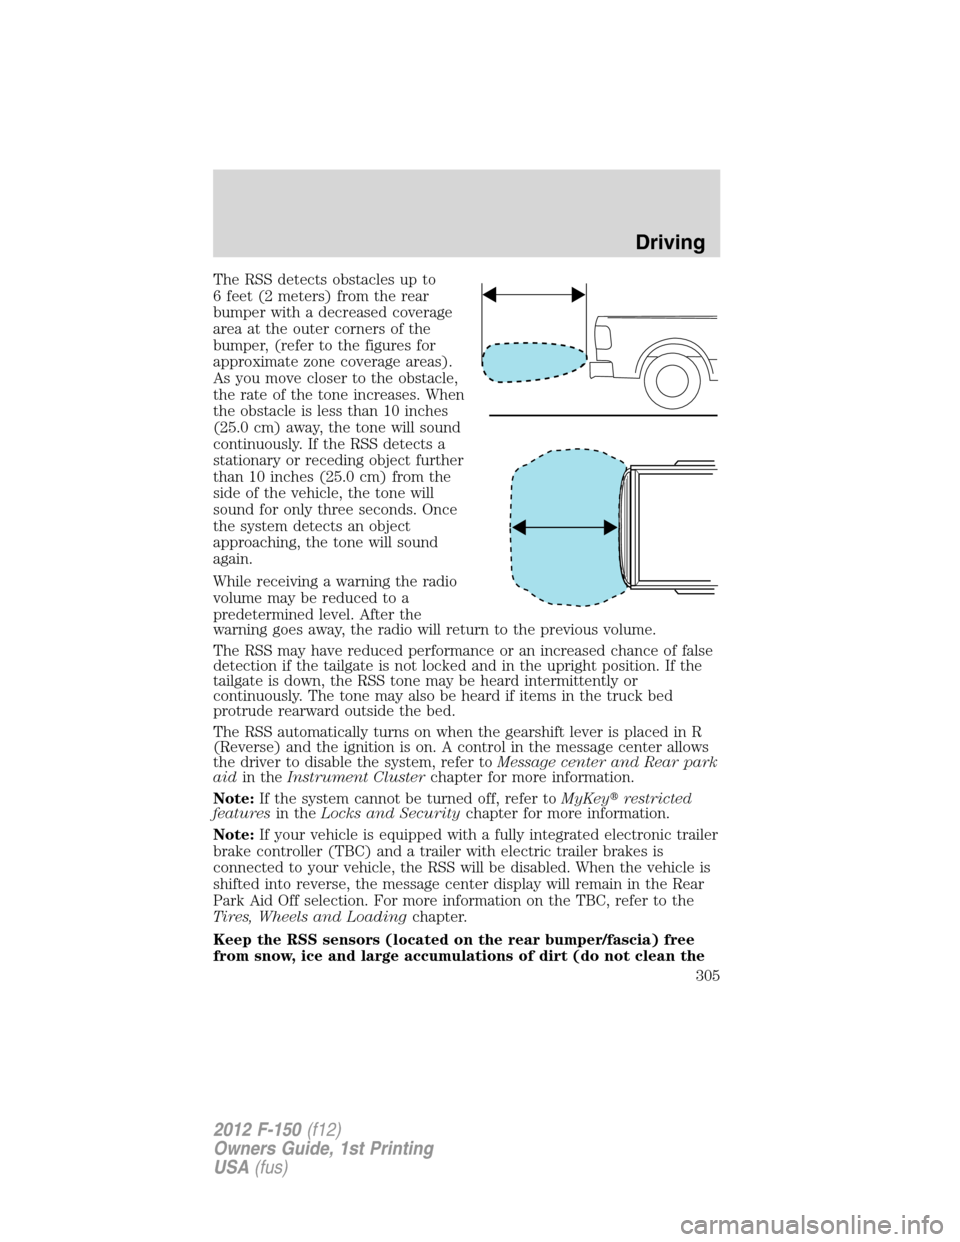 FORD F150 2012 12.G Owners Manual The RSS detects obstacles up to
6 feet (2 meters) from the rear
bumper with a decreased coverage
area at the outer corners of the
bumper, (refer to the figures for
approximate zone coverage areas).
As